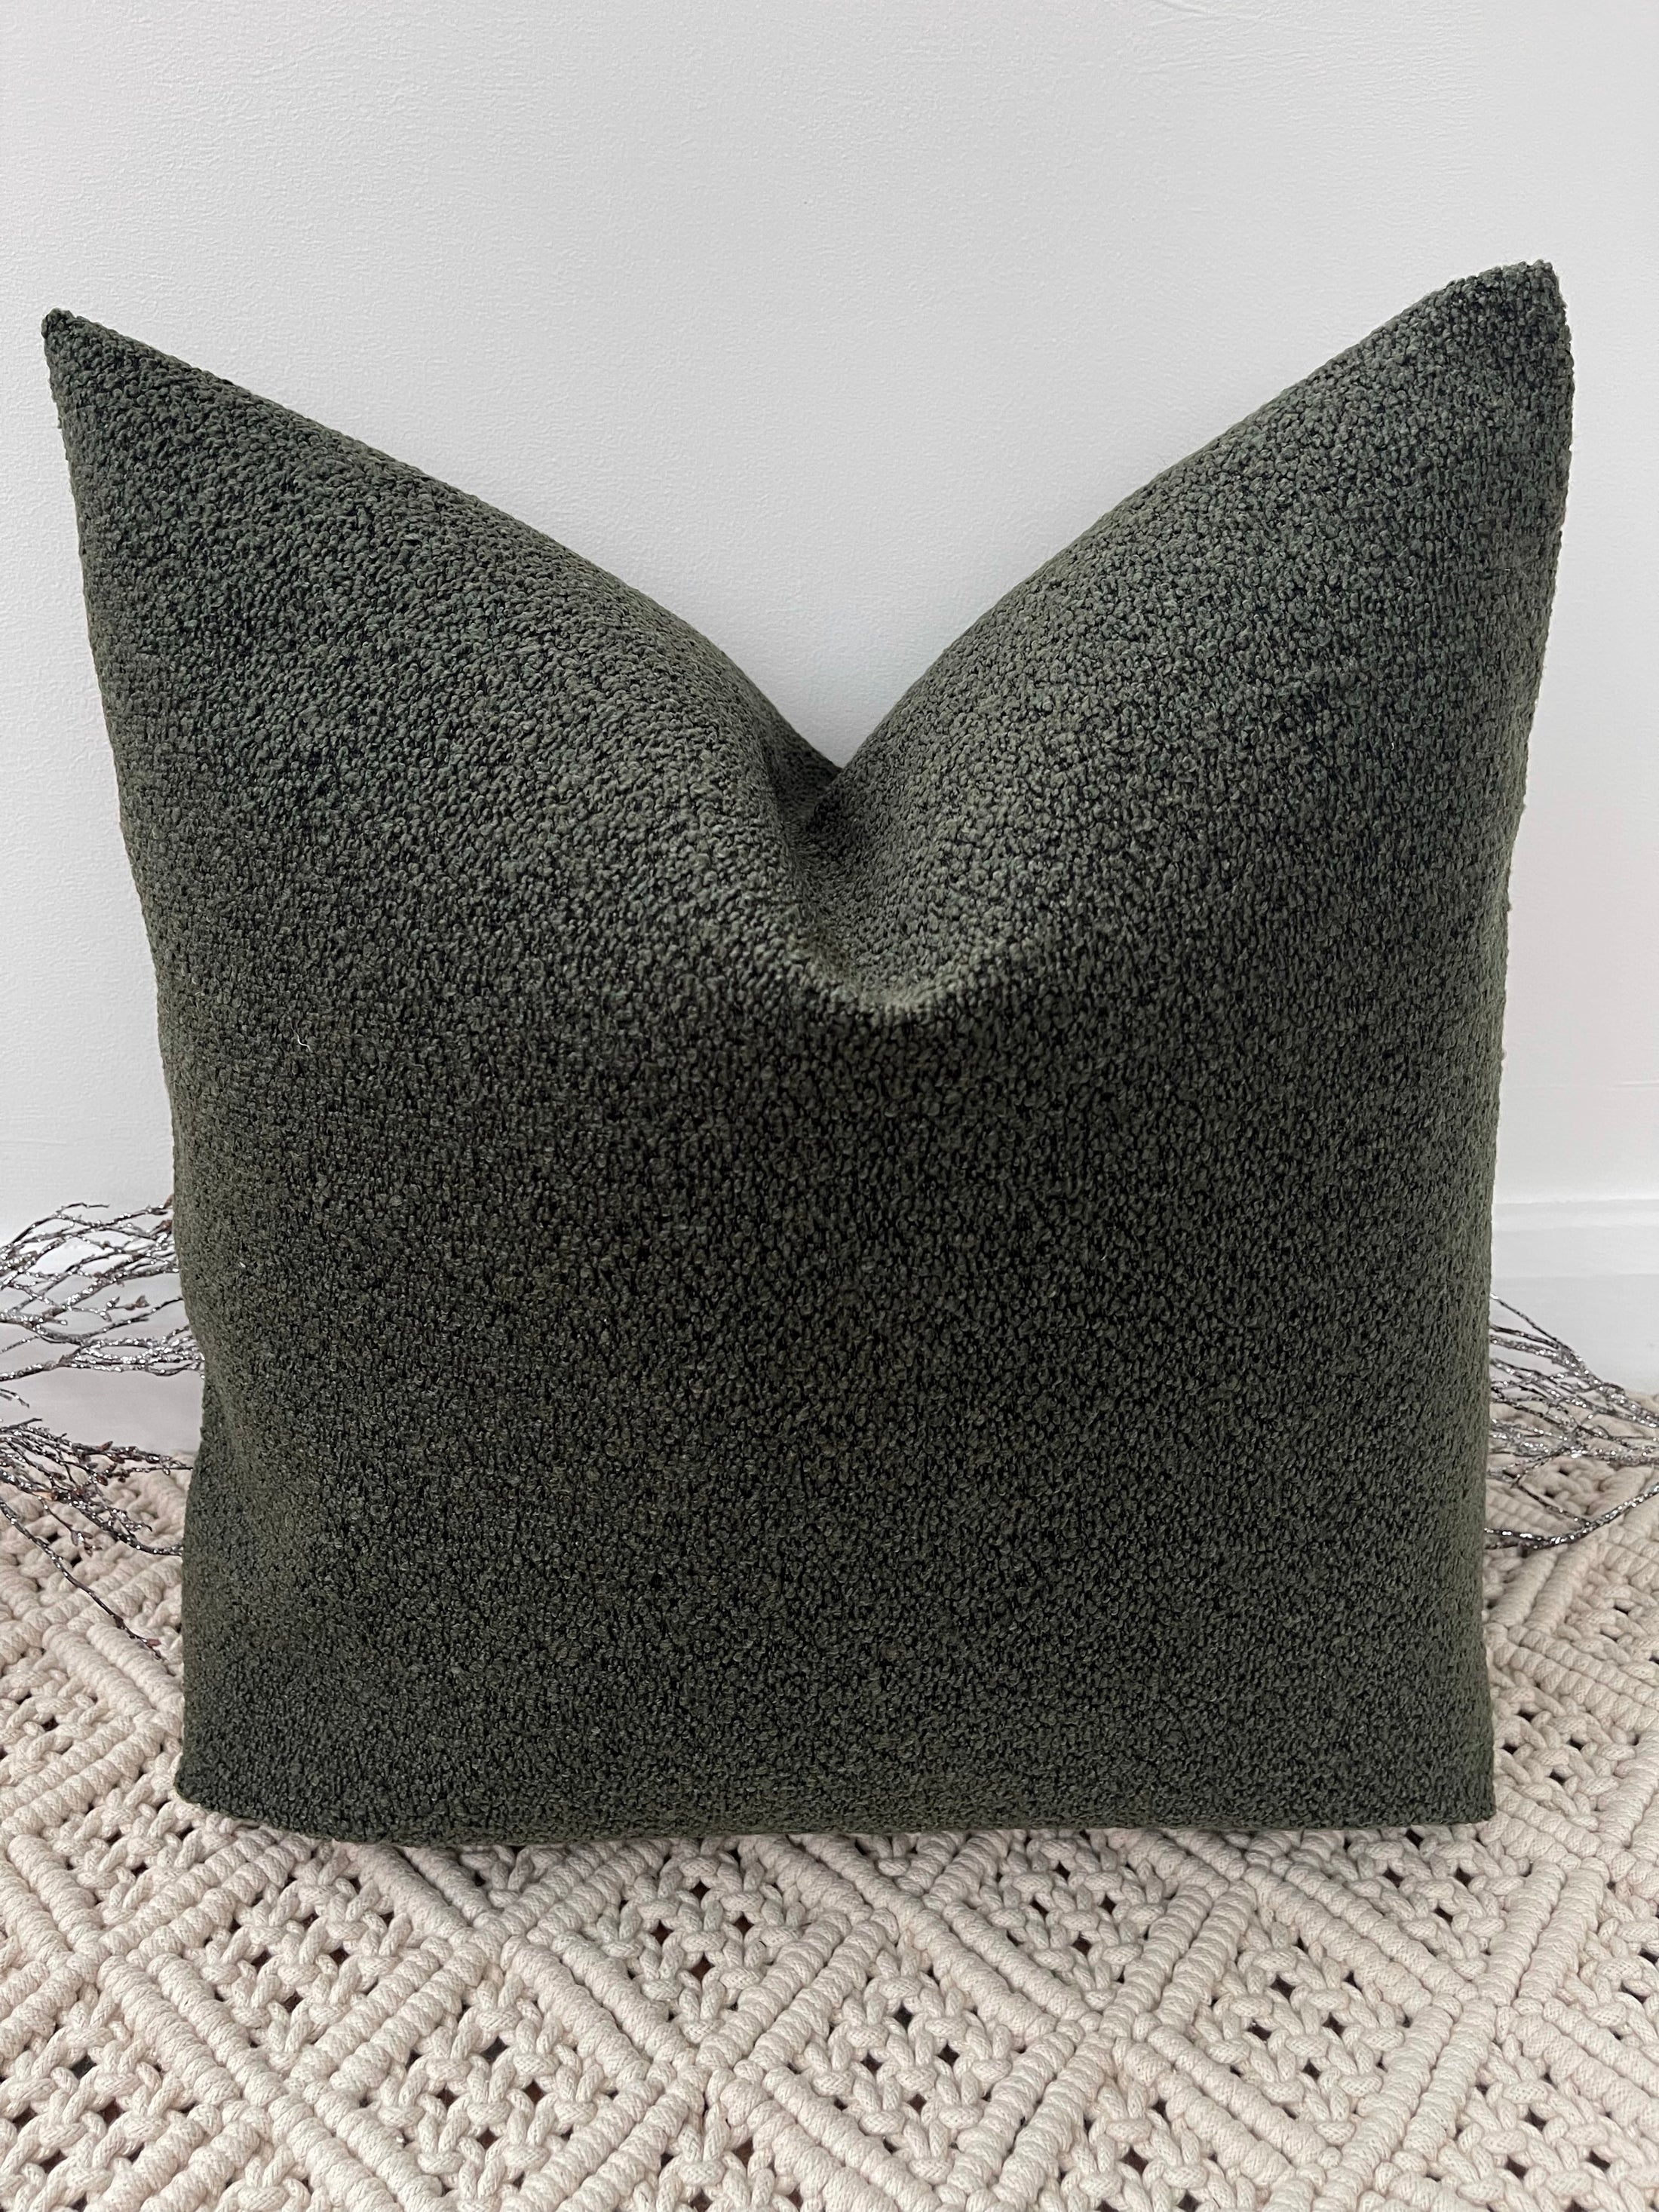 The Luxury Green Boucle - Style No. 128